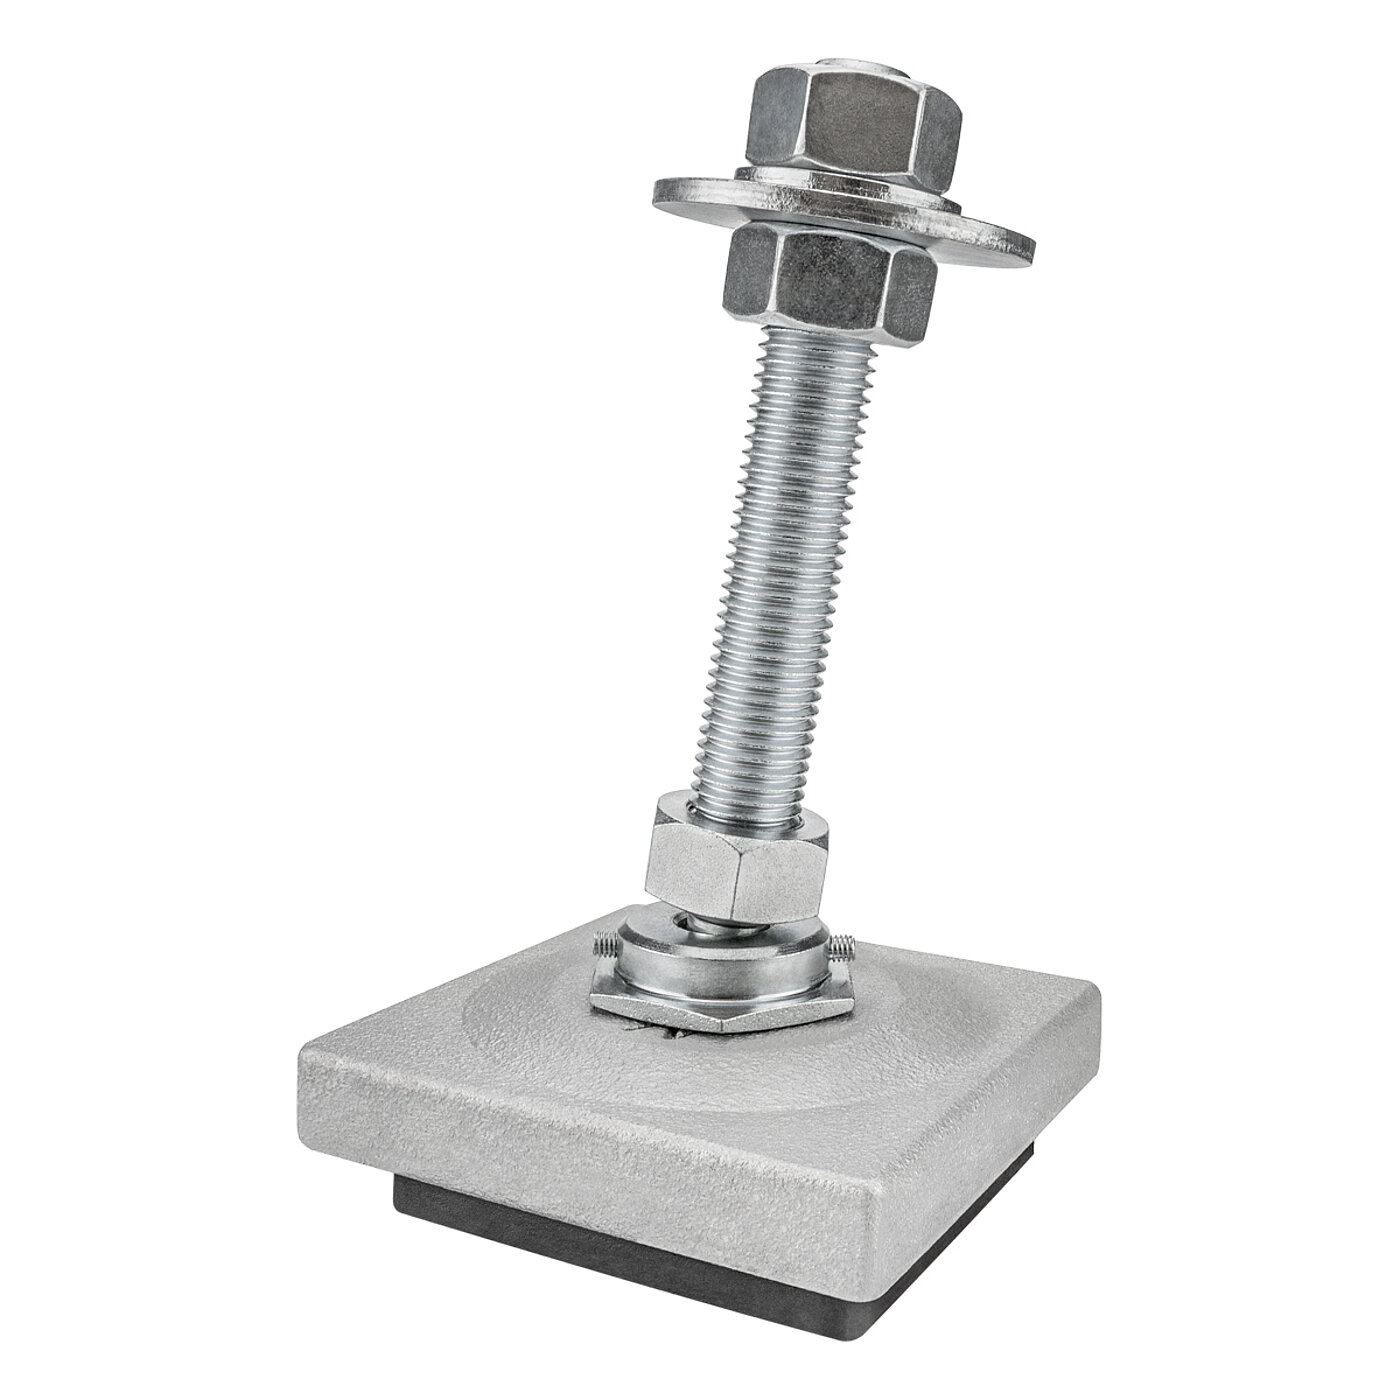 a square, silver-lacquered levelling element made of cast iron, with a pendulum-action zinc-coated levelling screw placed in a pressure fitting on top of the cast iron corpus, secured with two small grub screws on the sides against falling apart, and black elastomer for vibration damping at the bottom, isolated on white background